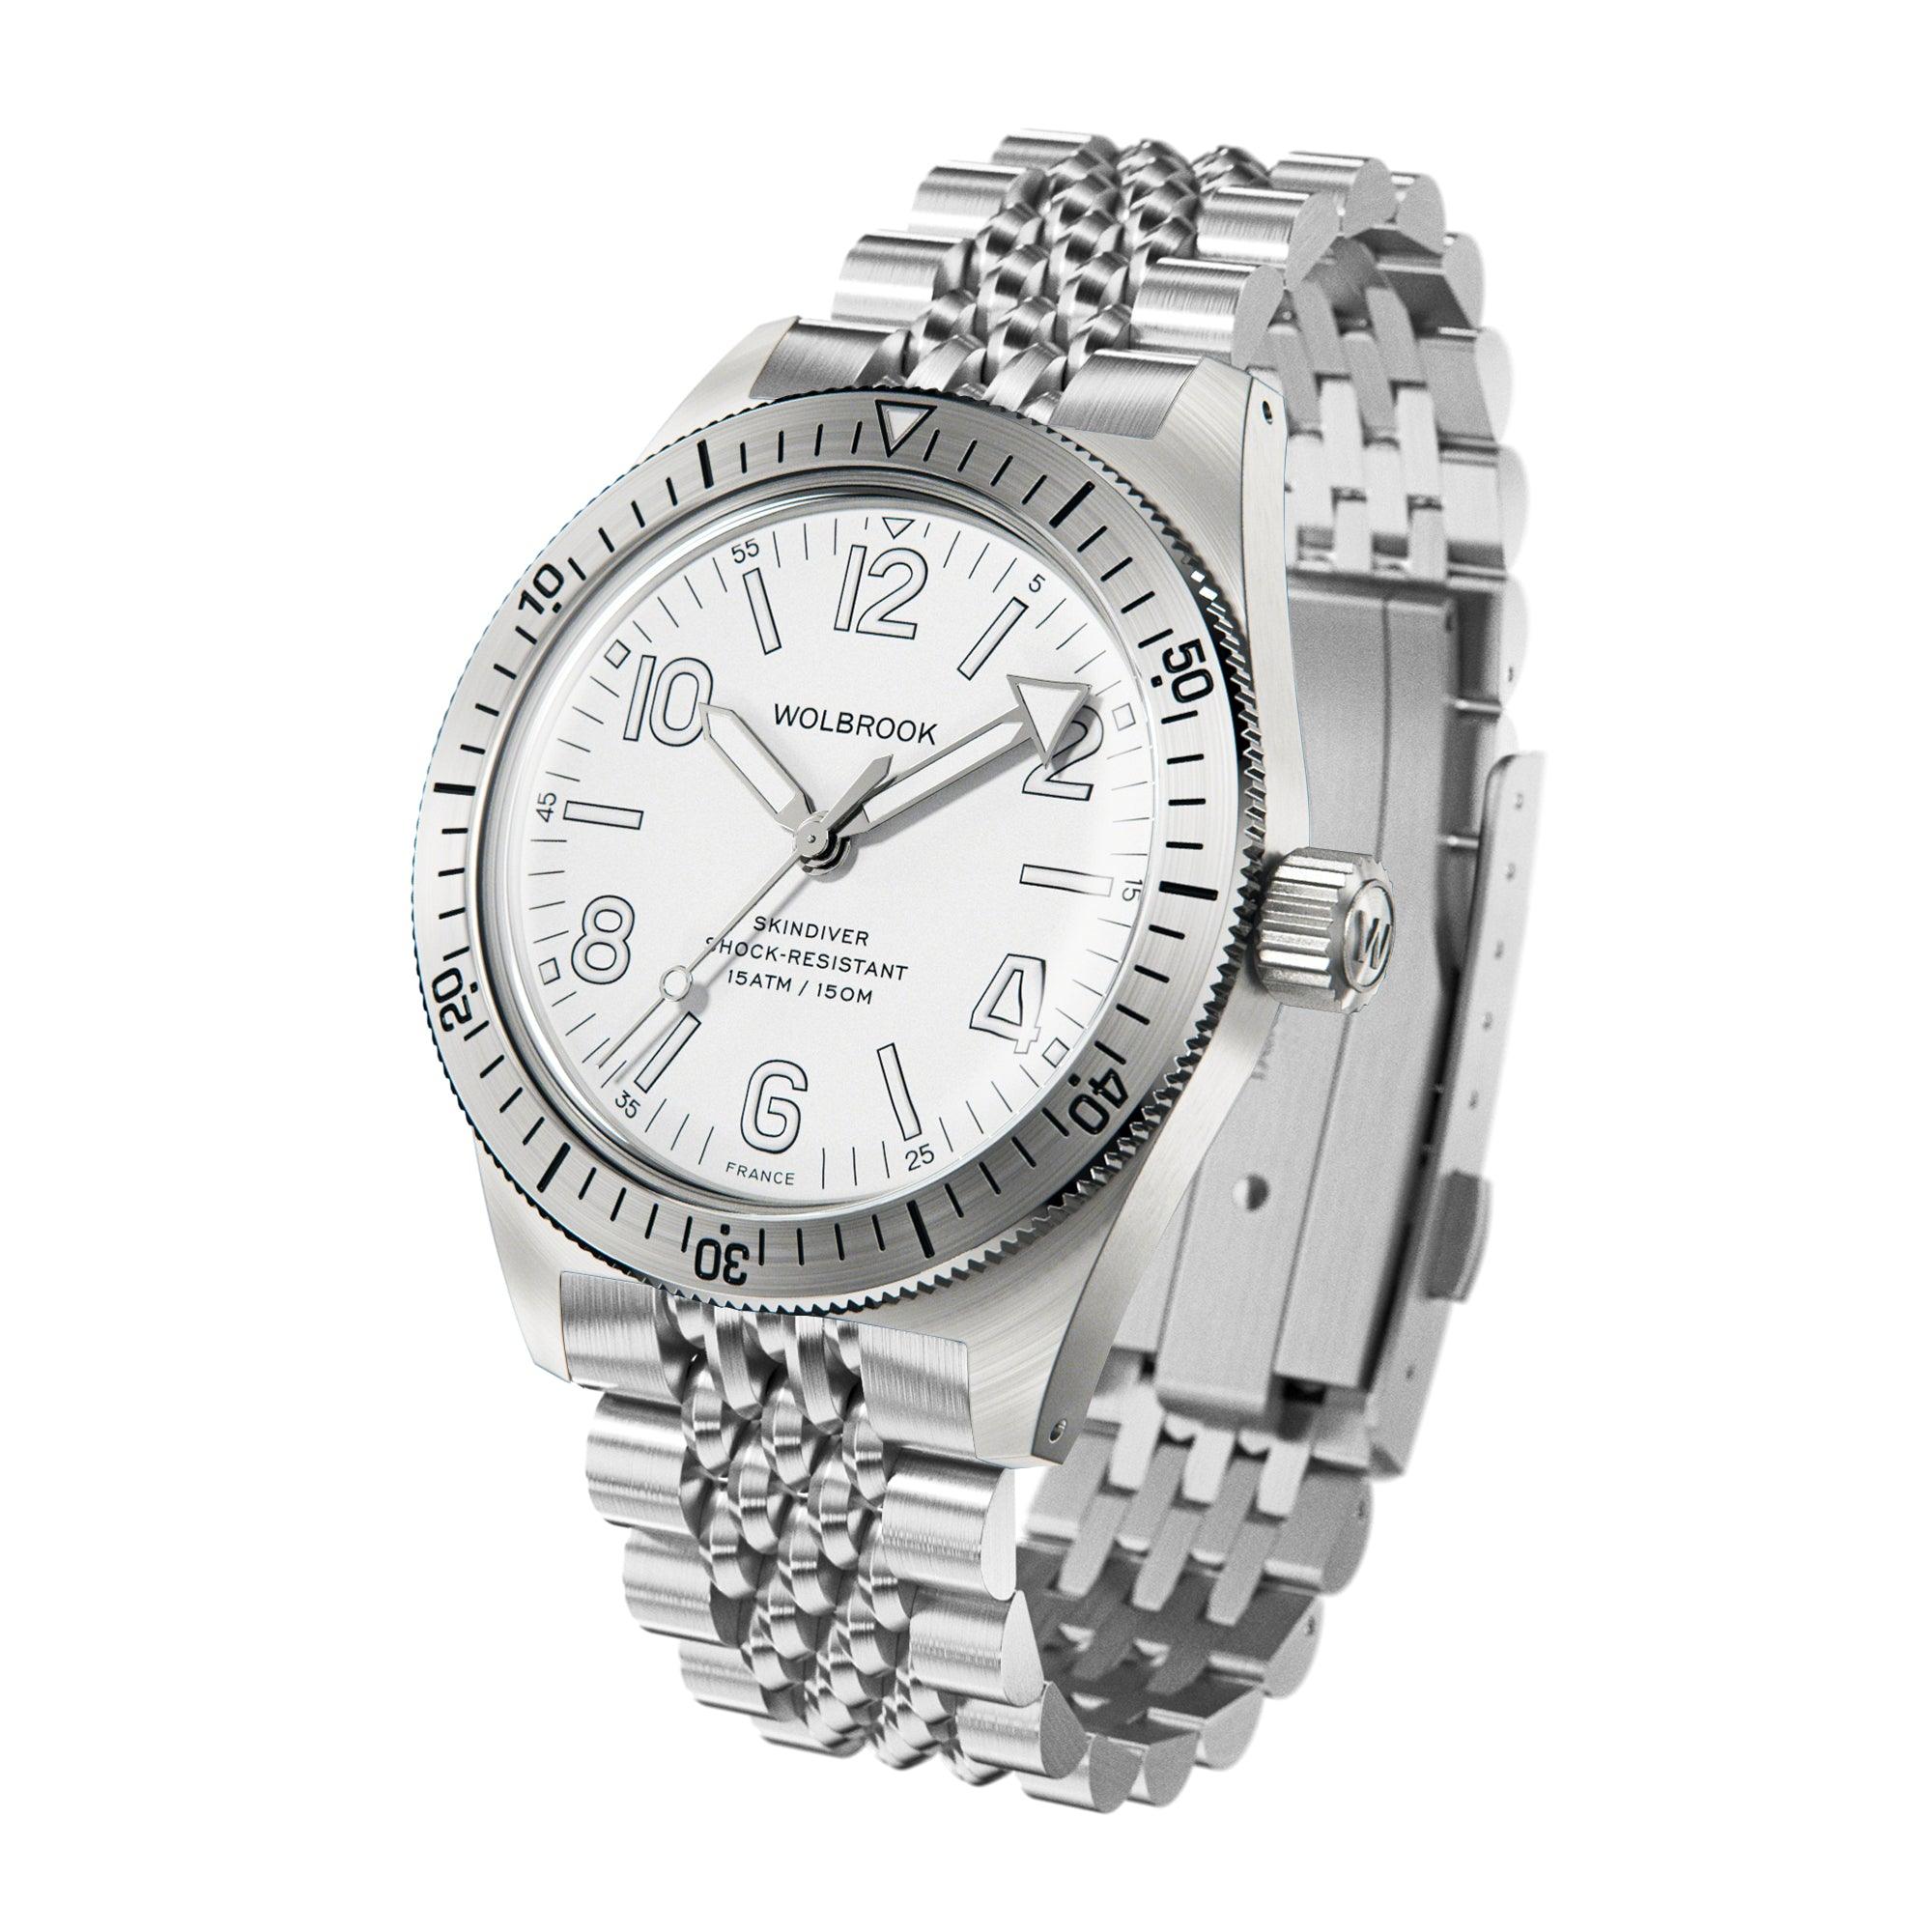 Skindiver Automatic Bracelet Watch All White Wolbrook Watches